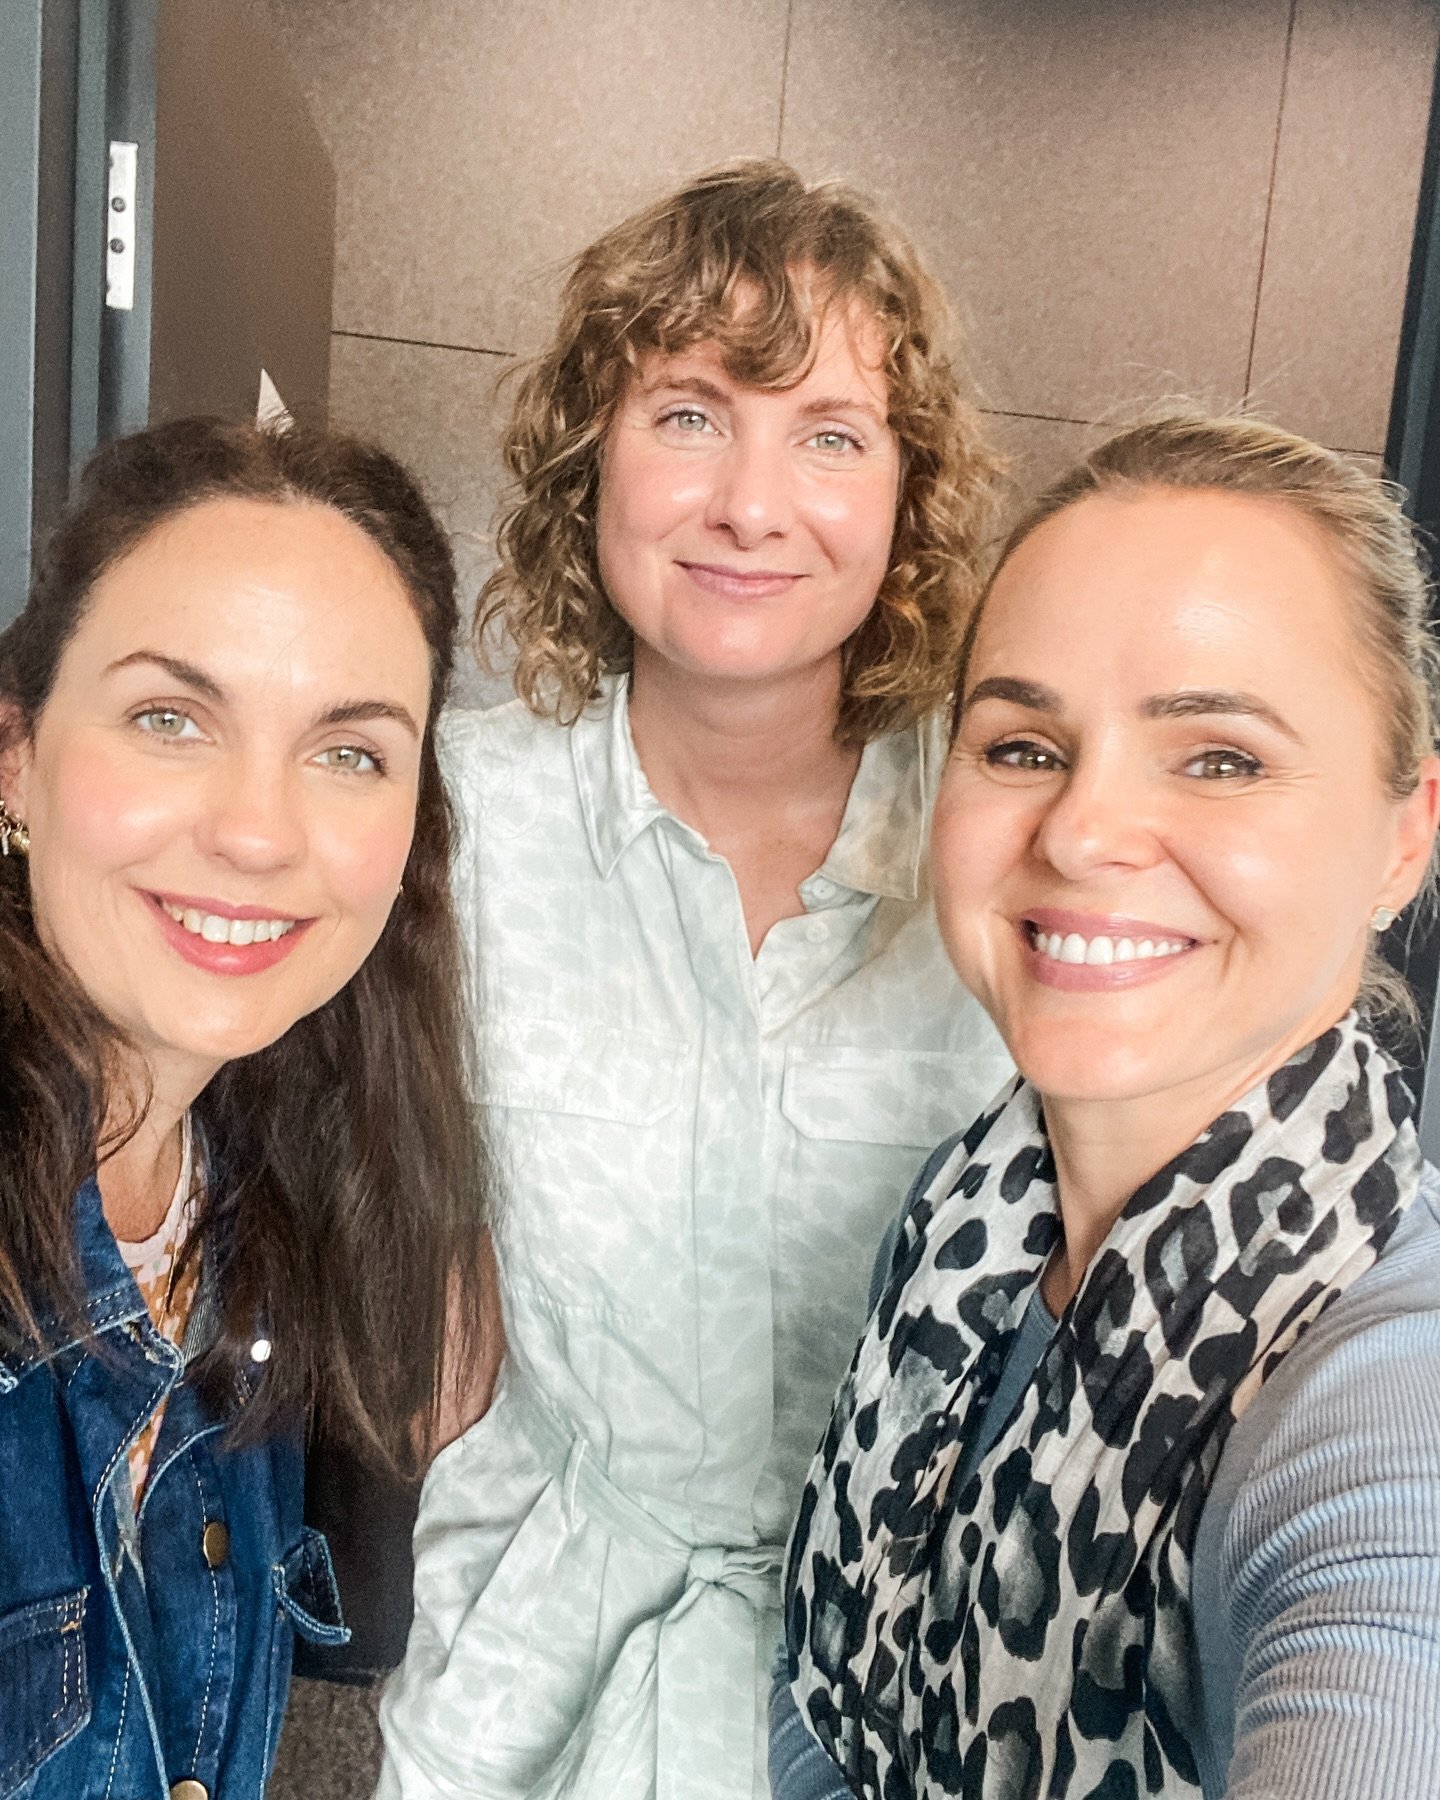 💖 The writers' room 💖

I had a fabulous time on Friday catching up with @karinamaywrite and @clarefletcherwriter in Sydney and appearing on their wonderful writing podcast @thatromcompod! Can you guess which trope/topic our episode centred on? 😉😅